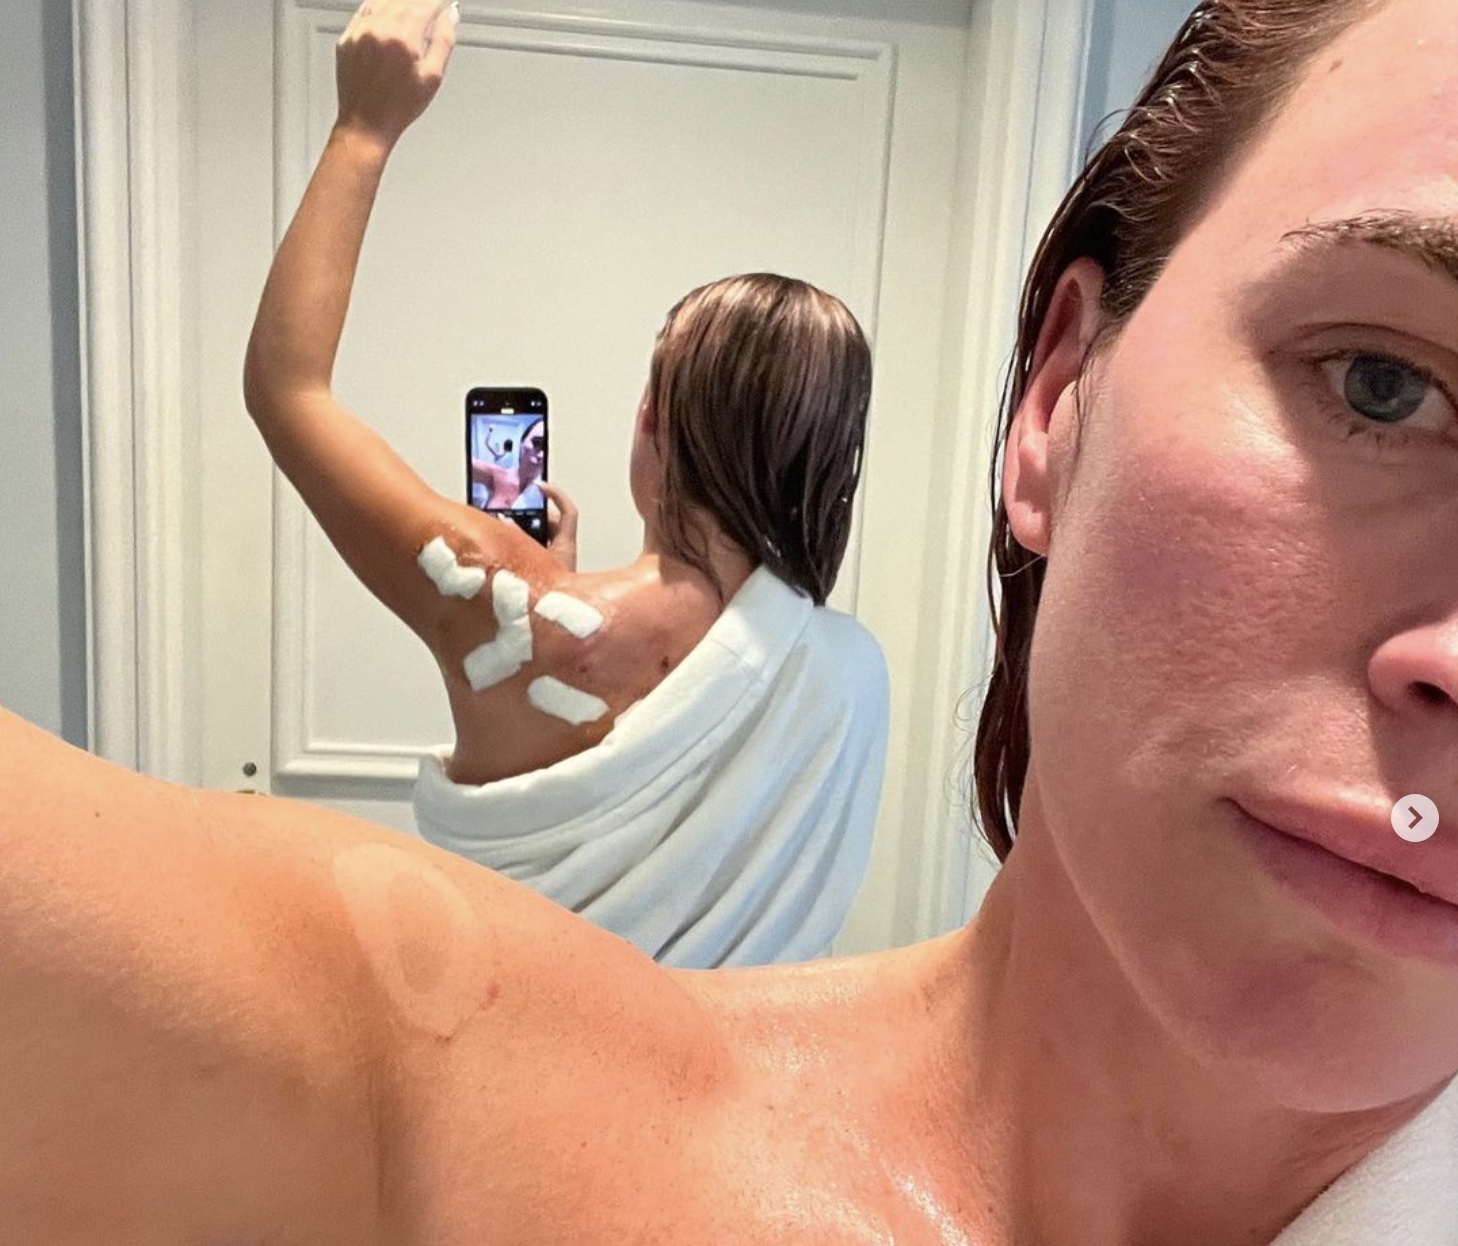 Teddi Mellencamp shows surgical scars after undergoing surgery to remove melanomas (Image: Instagram)